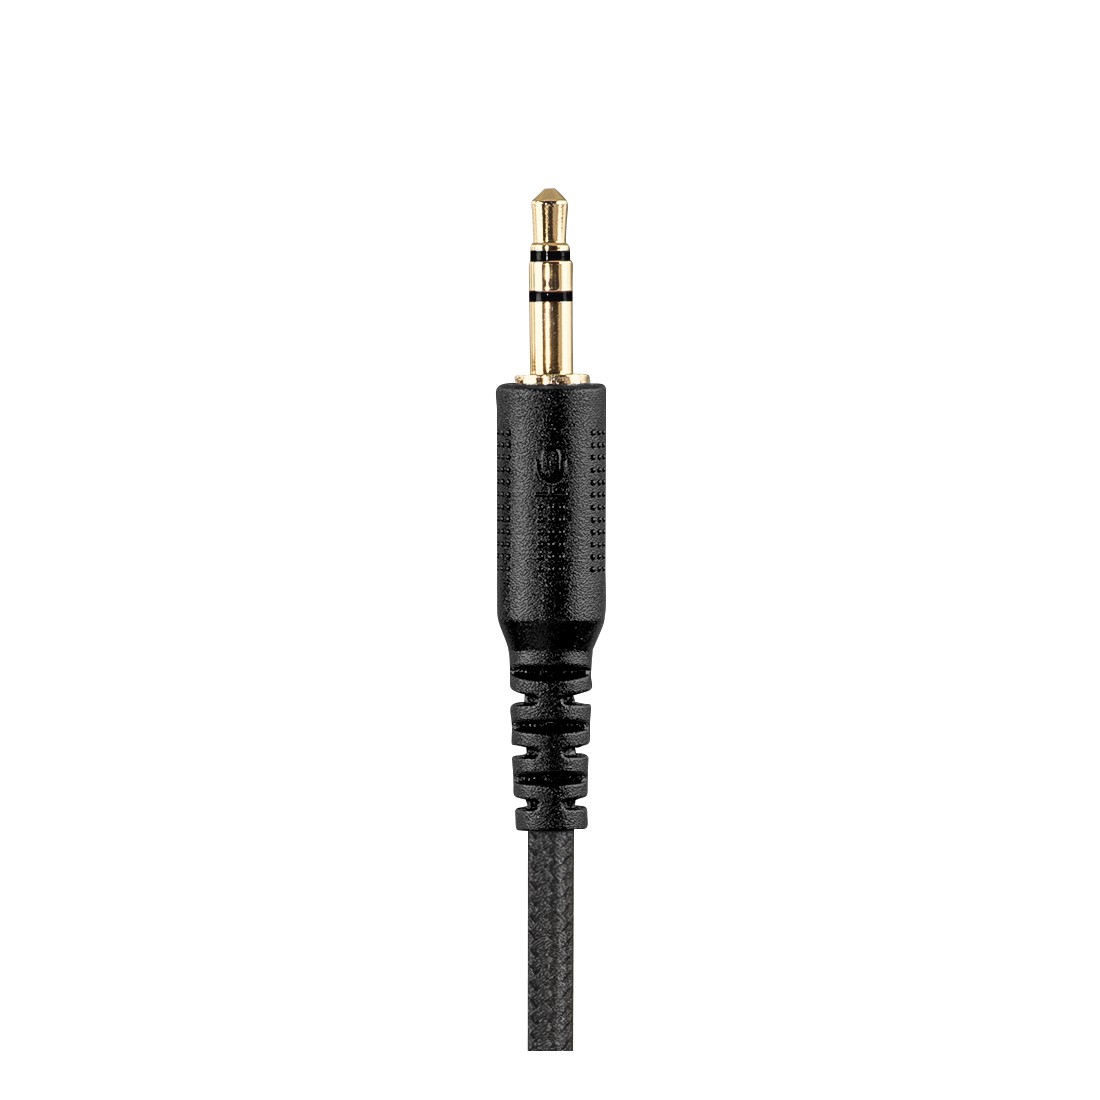 Hama MIC-P35 All-round Microphone for PC and Notebook